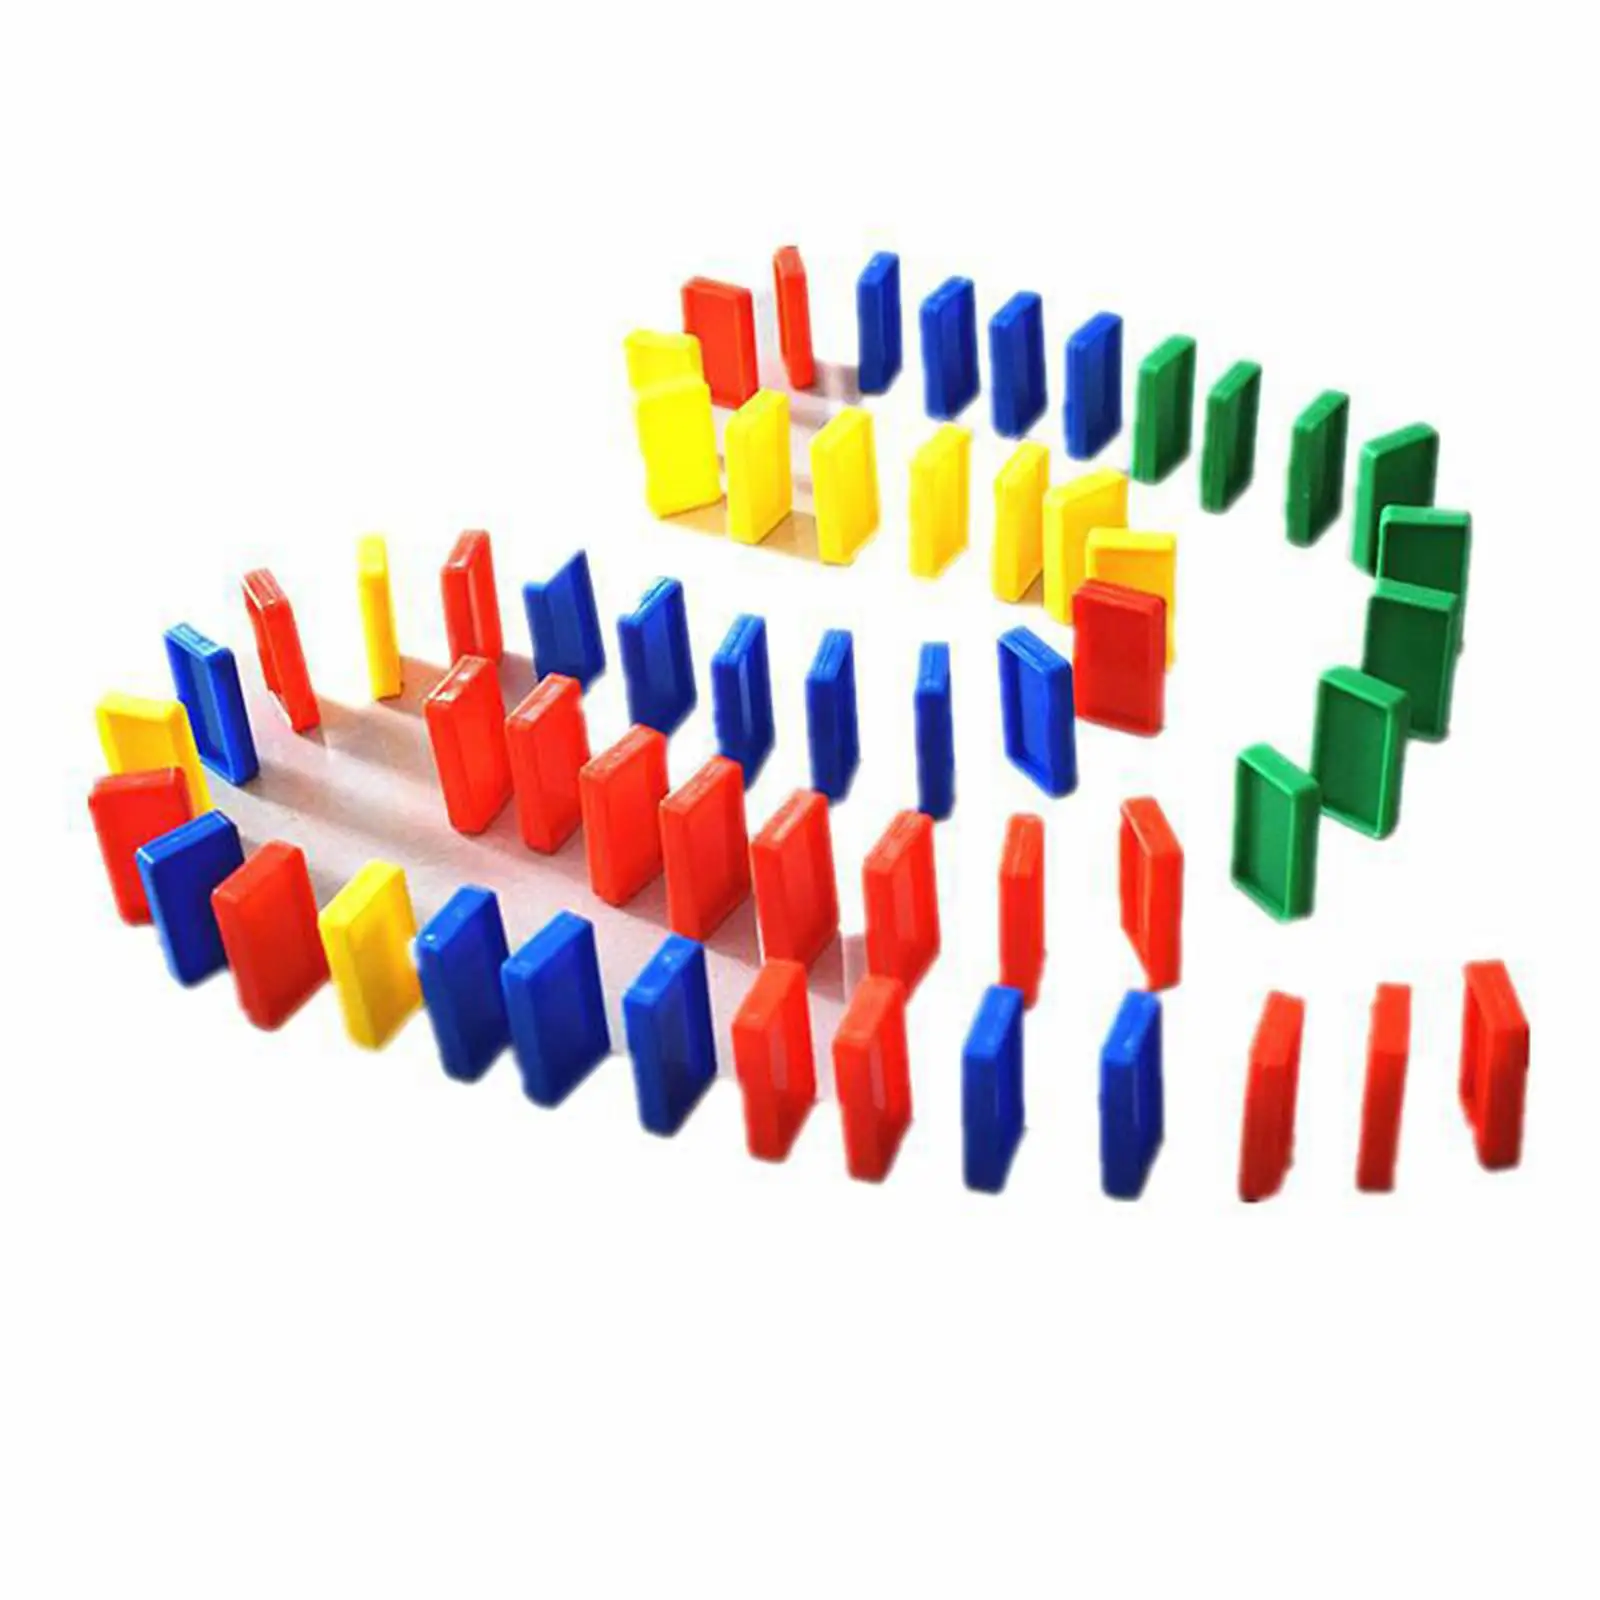 100x Dominoes Train Blocks Set Educational Play Game Stacking Toy Building for Girls Boys Toddler Kids Children Birthday Gifts